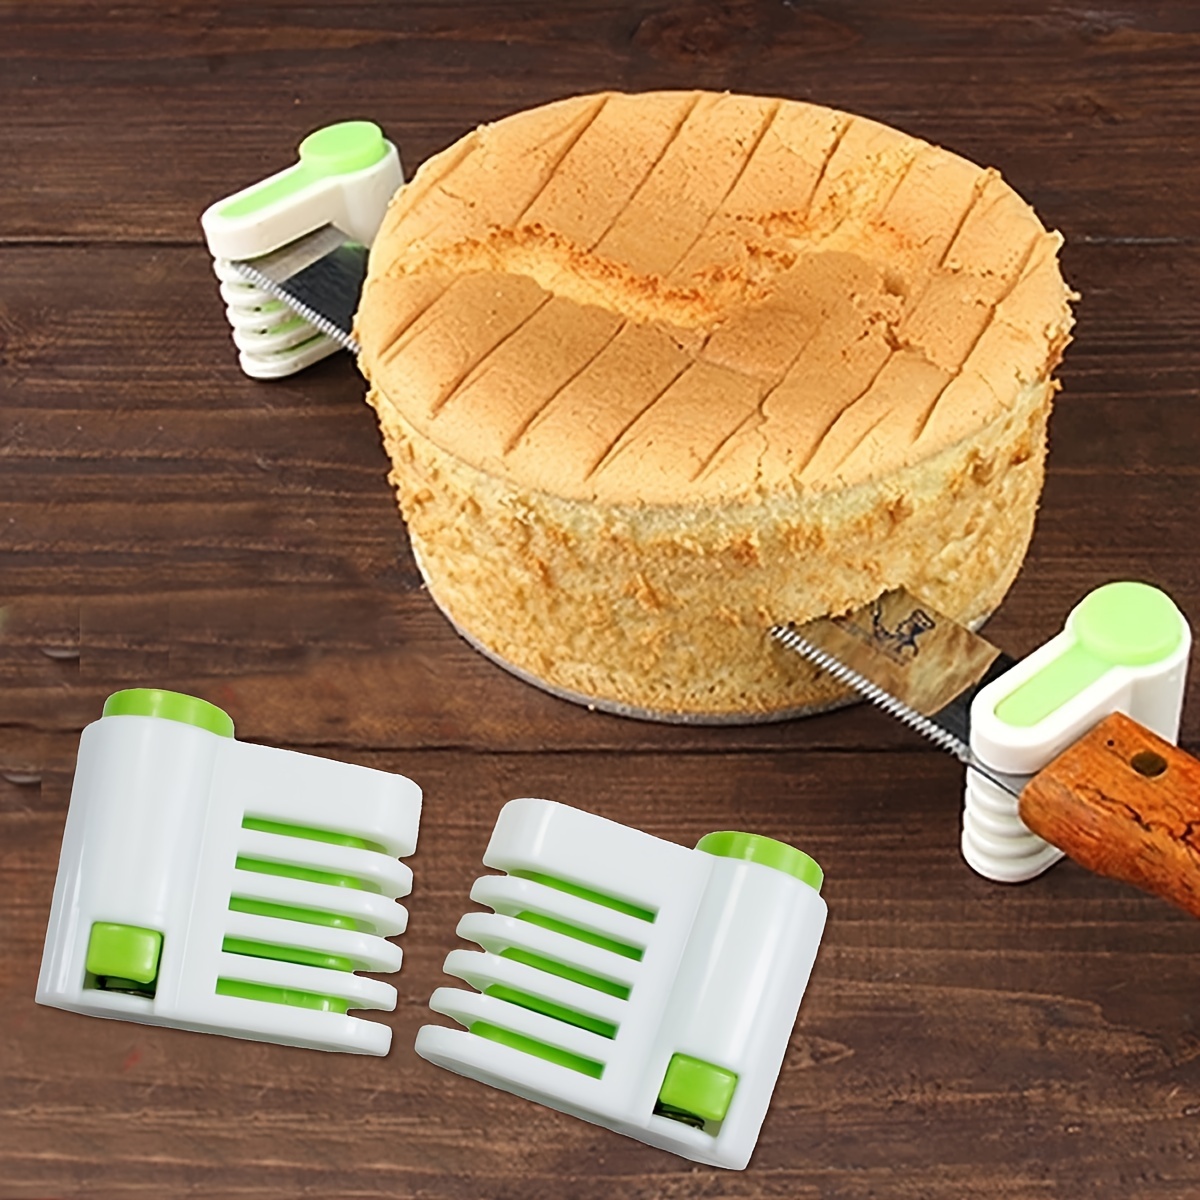 Toast Bread Slicer Stand Plastic Bakeware Slicing Tool Loaf Cutter Rack  Foldable Cutting Manual Slicers Kitchen Gadgets Tools